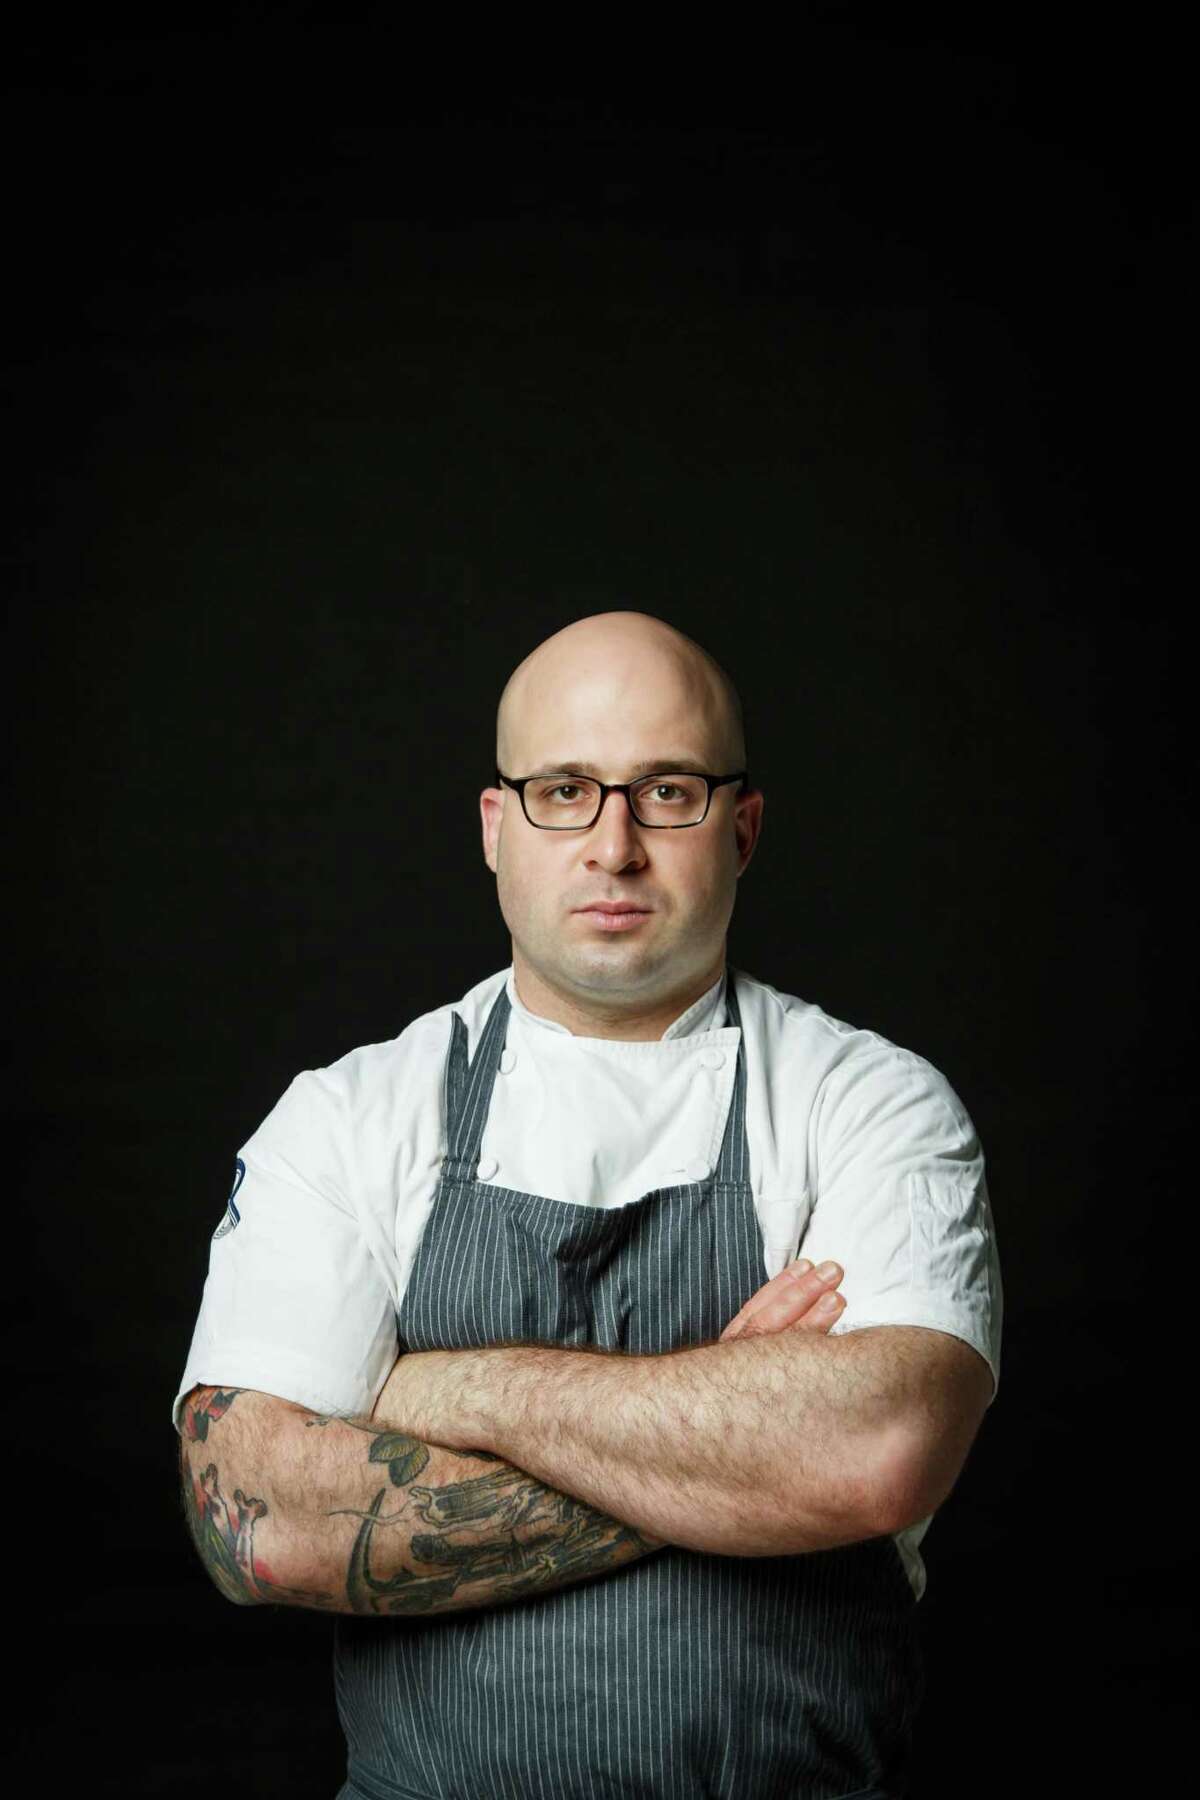 Chef Seth Siegel-Gardner of The Pass & Provisions